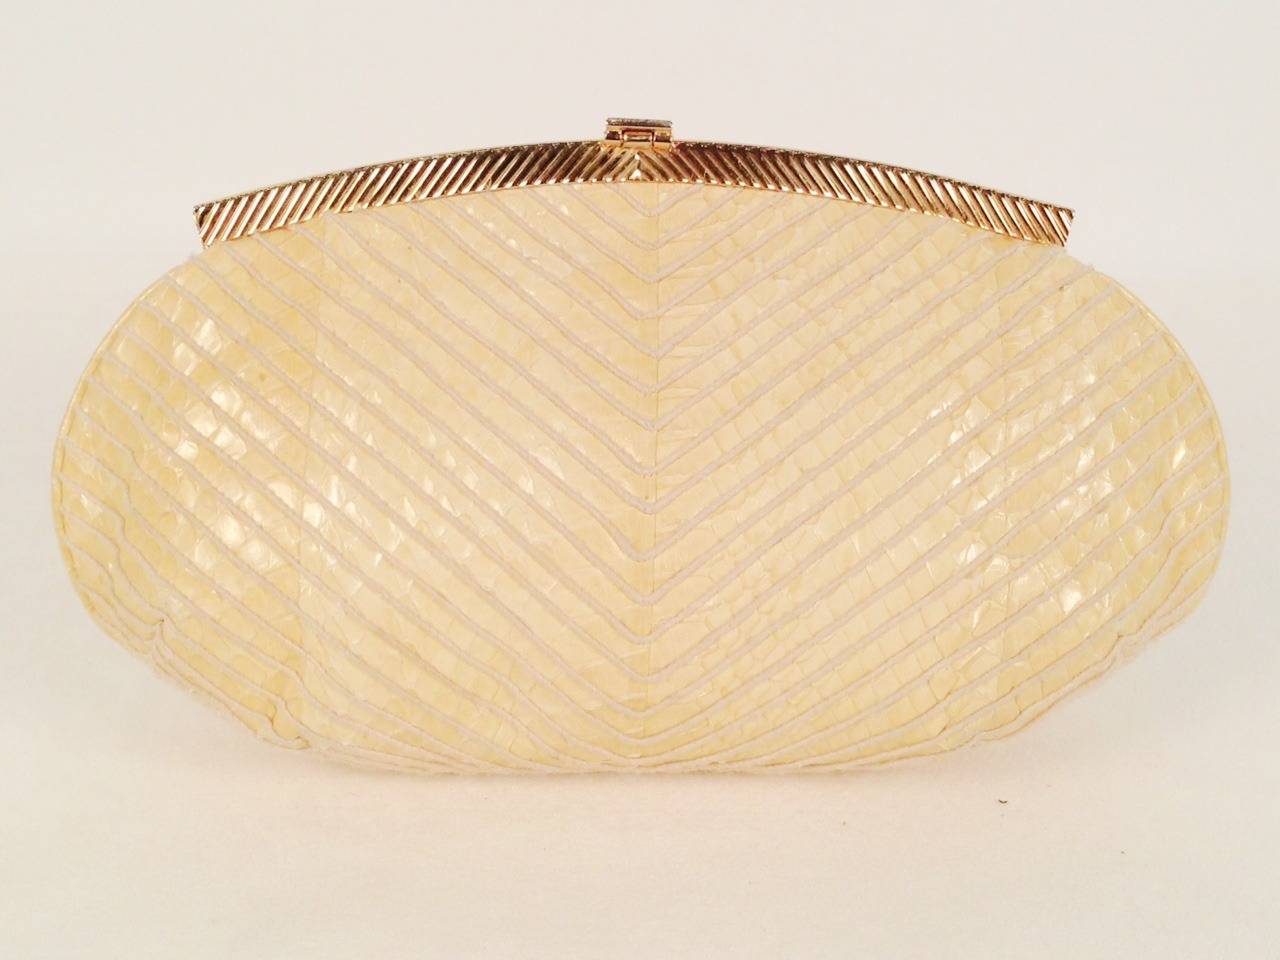 Vintage Python Convertible Clutch is highly desired by all collectors of Judith Leiber! Features slightly gathered, sumptuous lizard skin in a luscious shade of French Vanilla.  Gold tone chain converts from clutch to shoulder bag with minimal